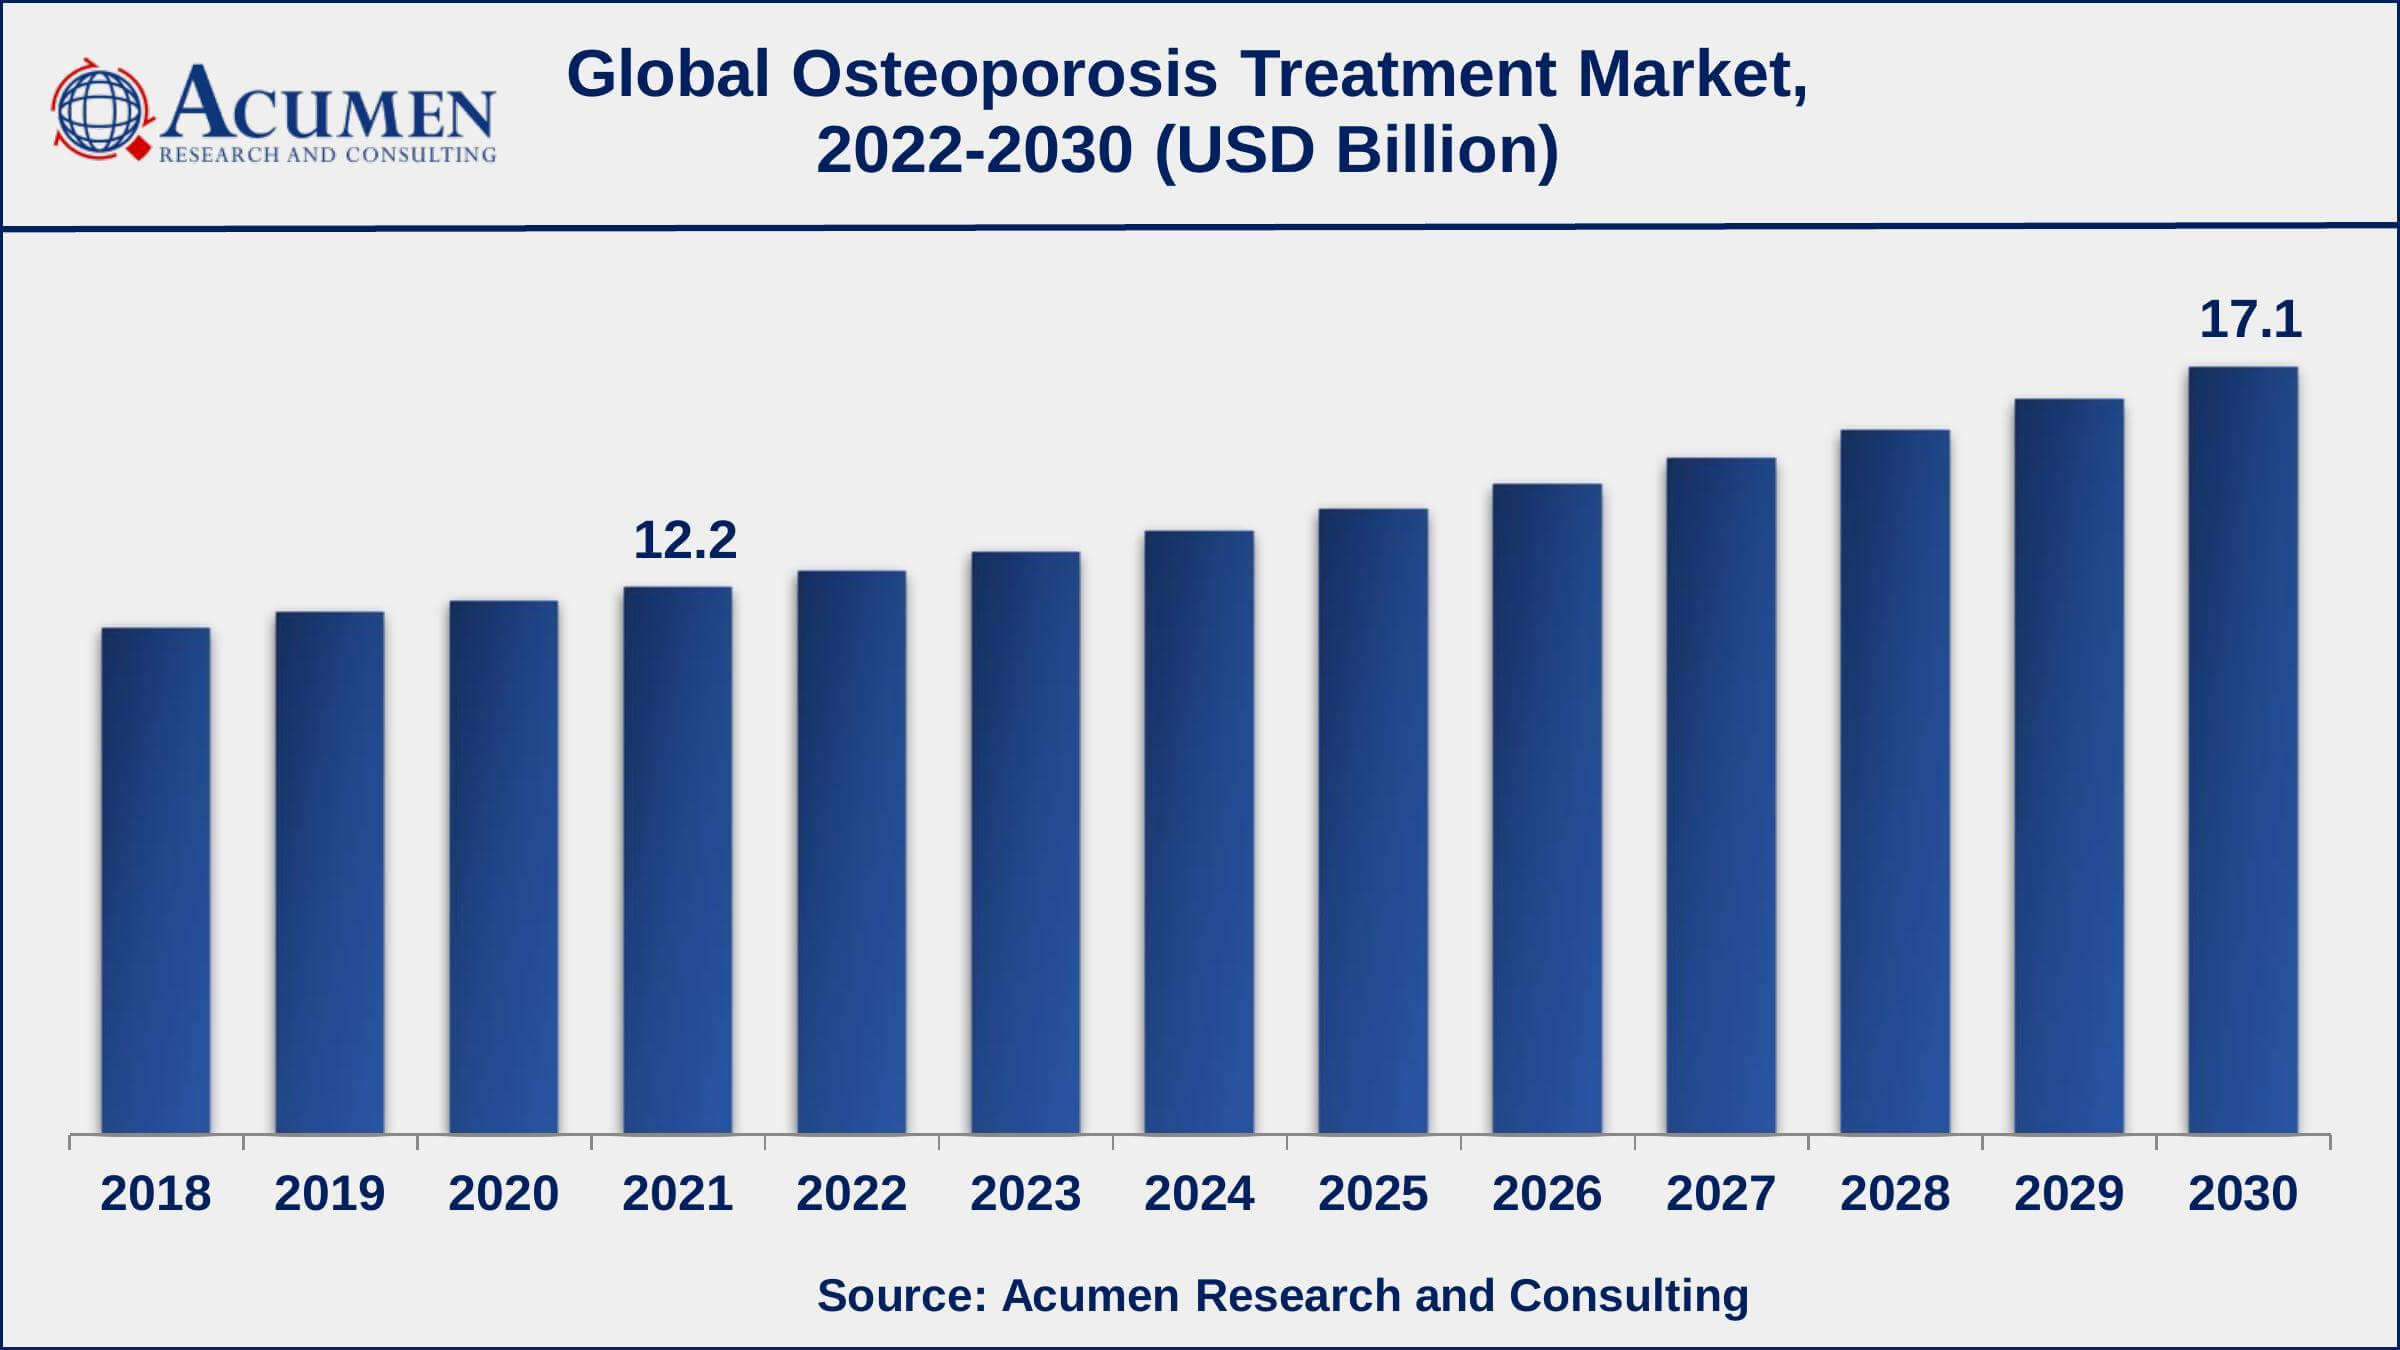 Asia-Pacific osteoporosis treatment market growth will record a CAGR of more than 4% from 2022 to 2030